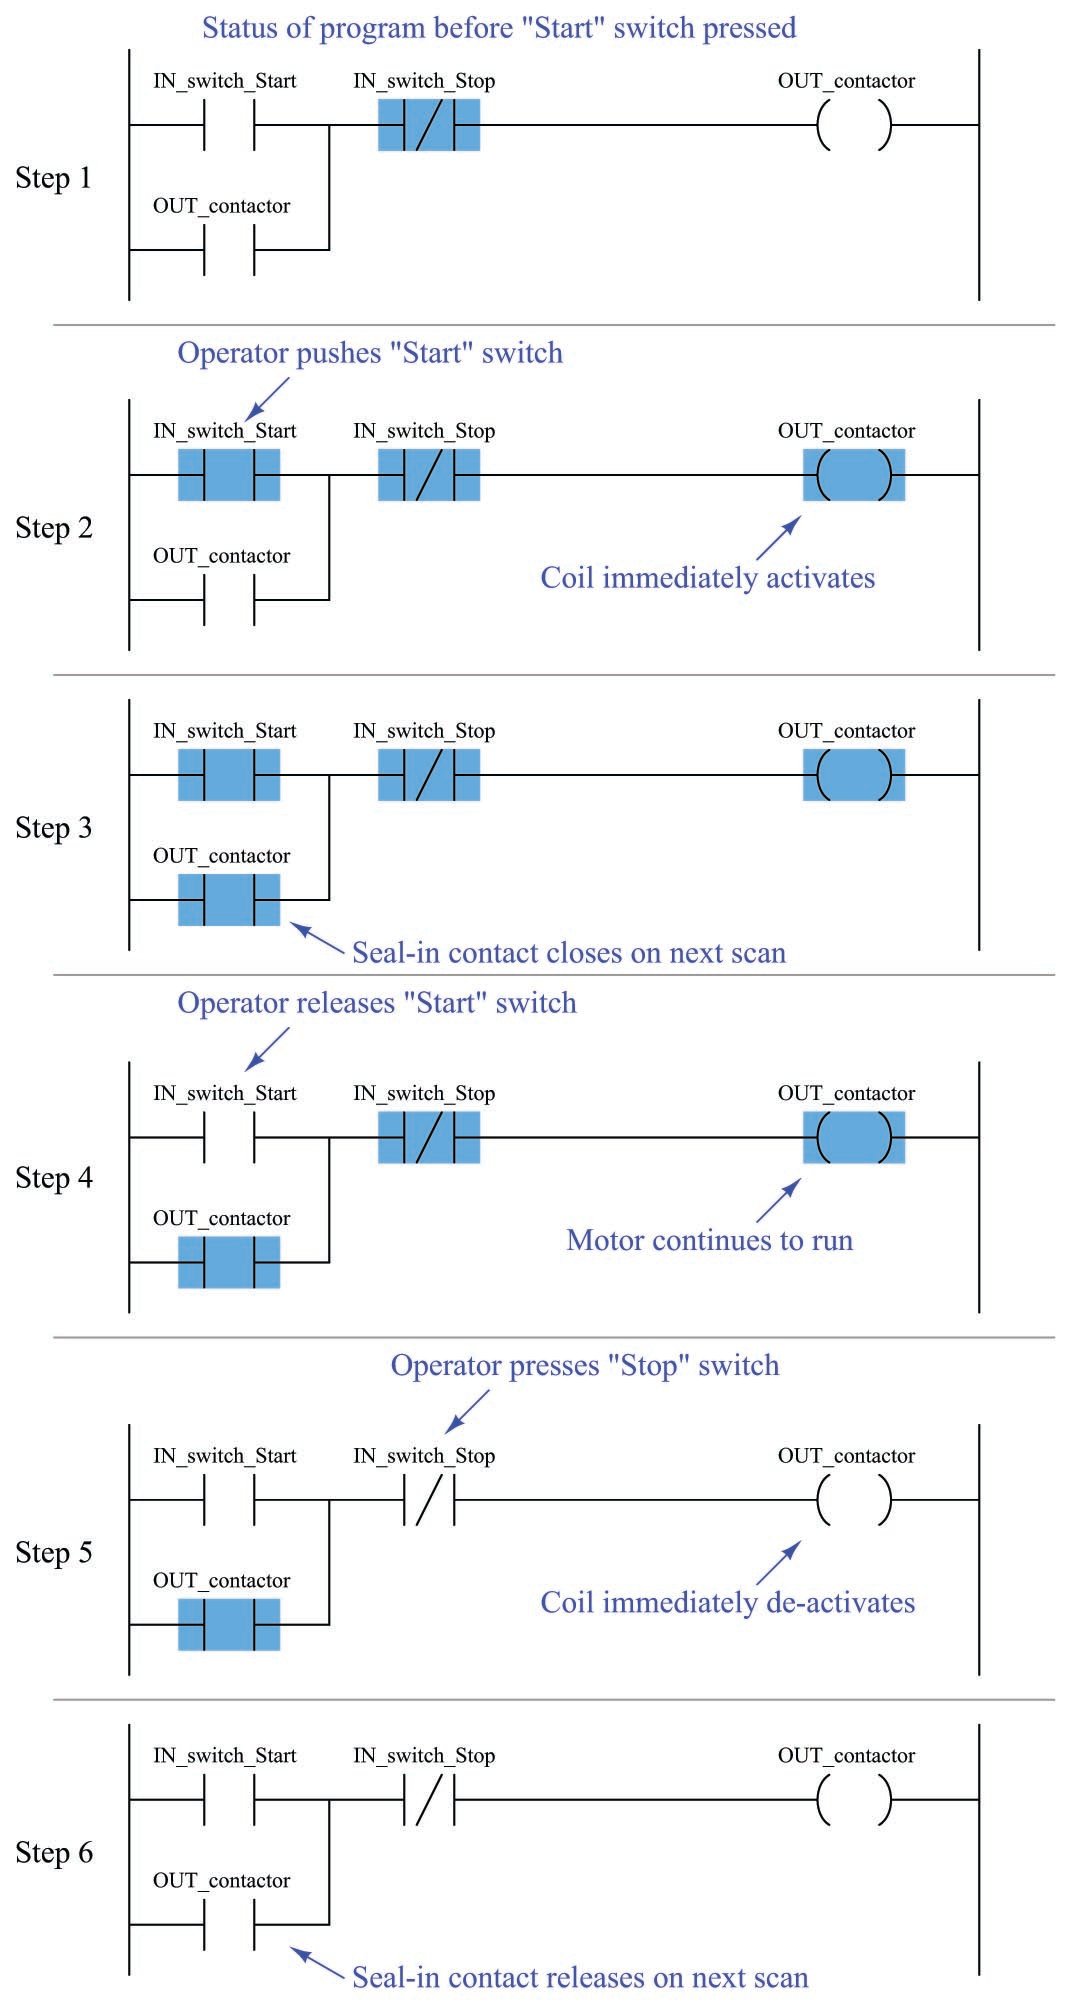 study the ladder logic program in figure 8-37, and answer the questions that follow